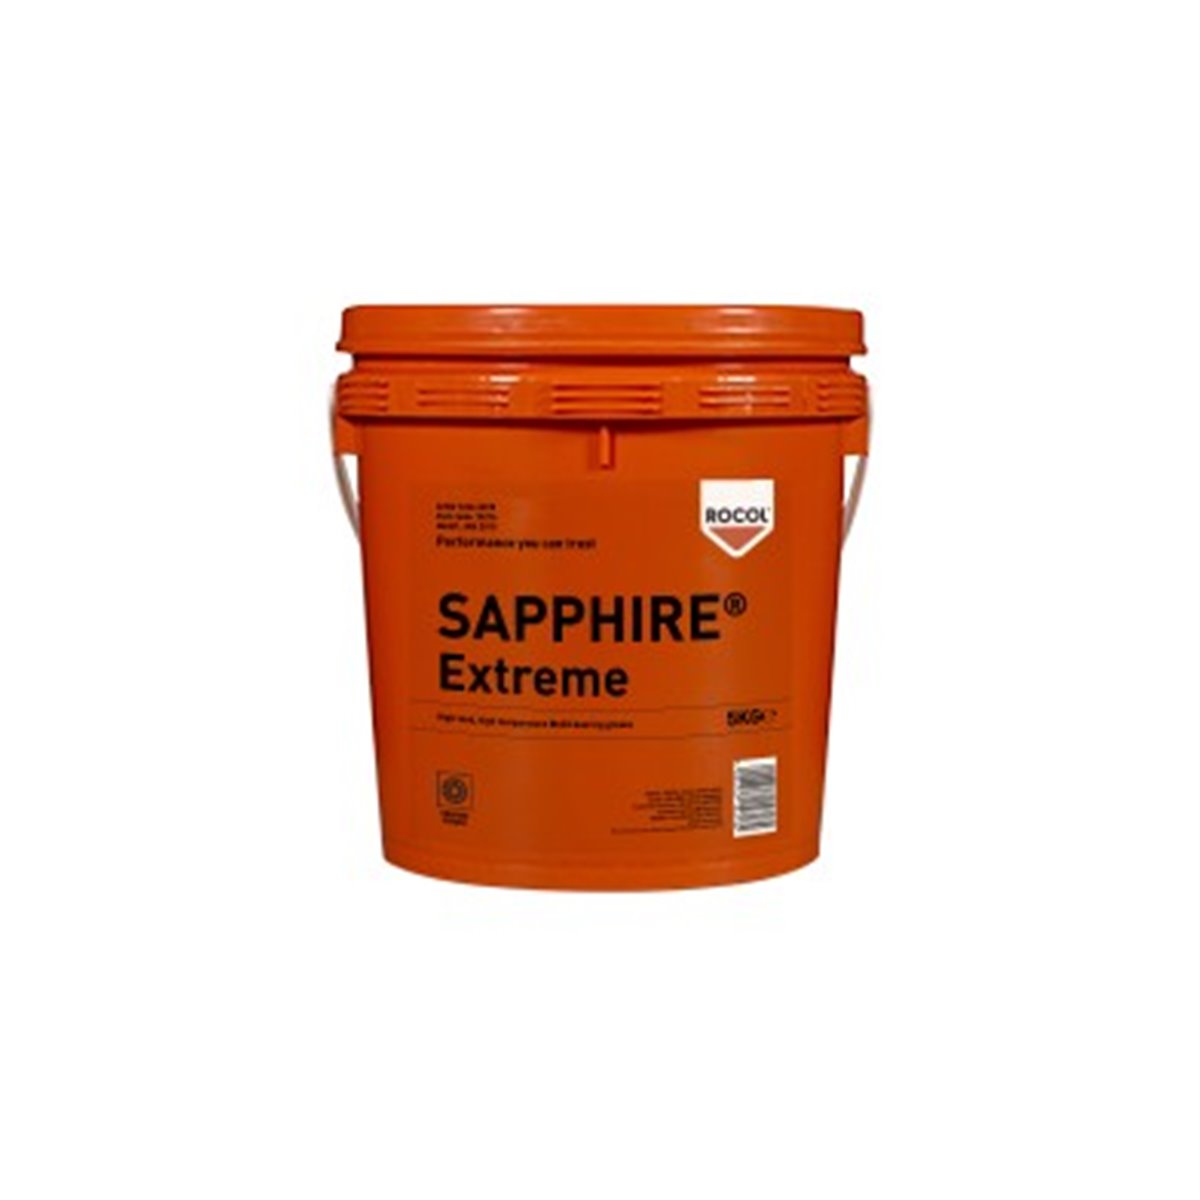 SAPPHIRE Extreme Rocol 5kg RS12216